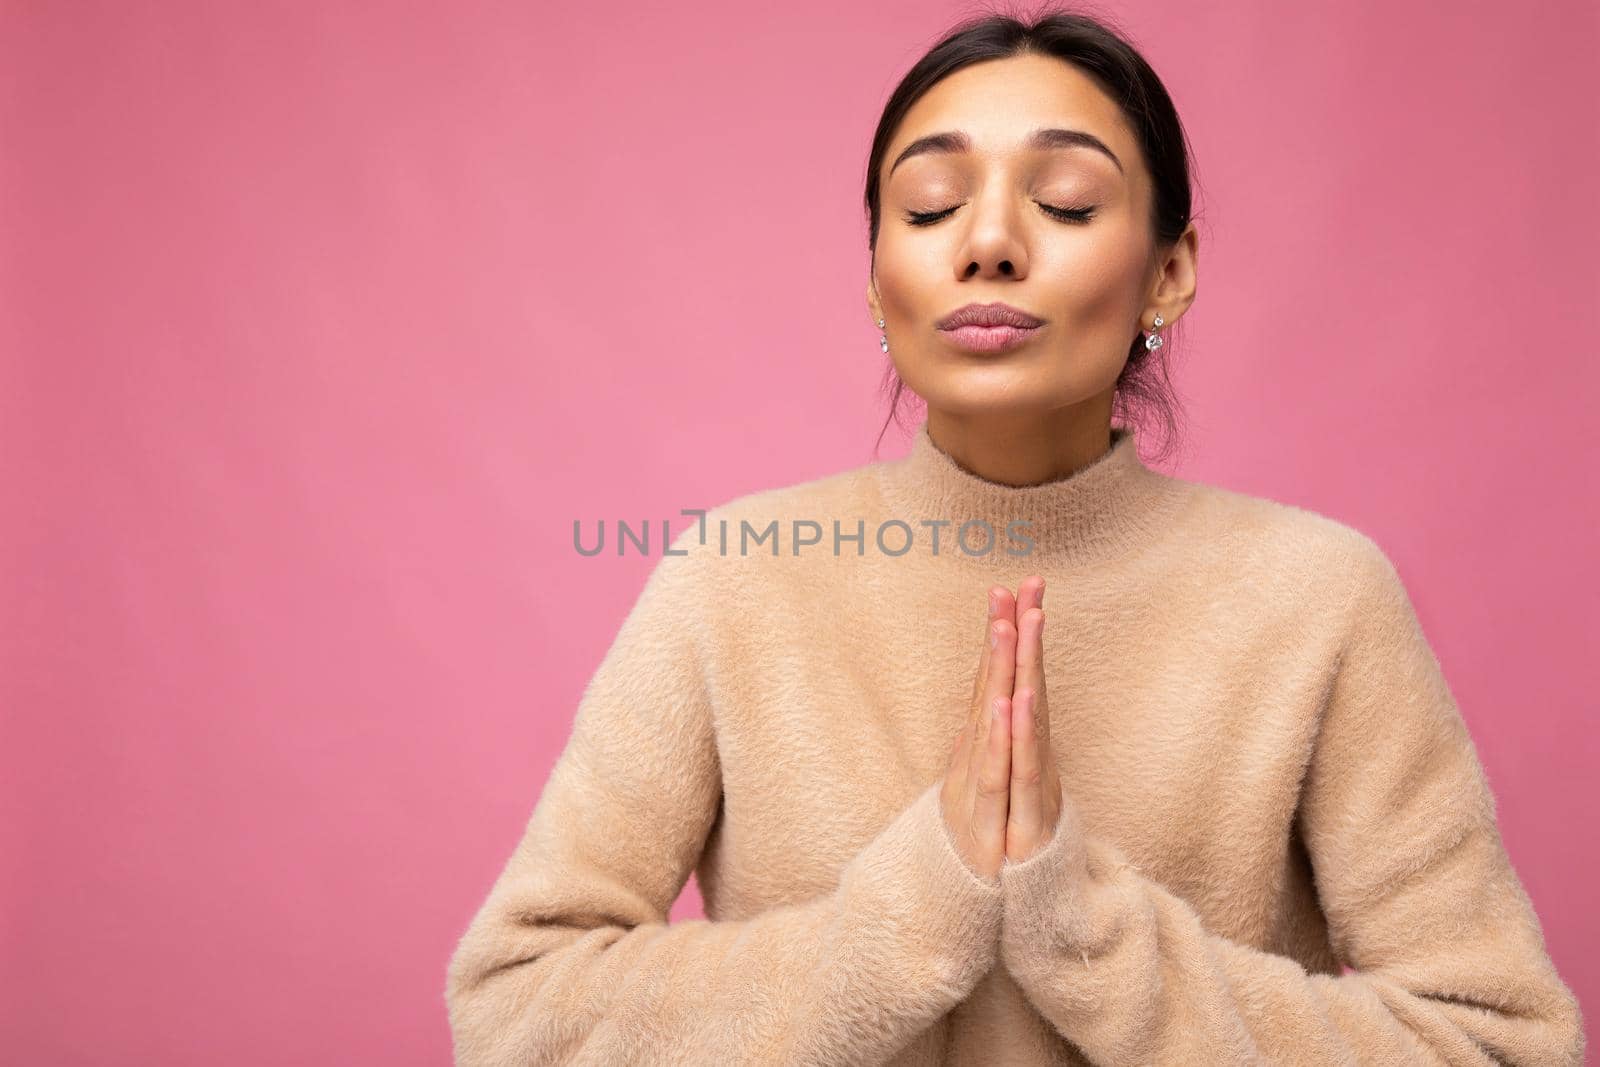 Portrait of young positive happy beautiful brunette woman with sincere emotions wearing casual beige jersey isolated over pink background with free space and holding hands in praying gesture by TRMK